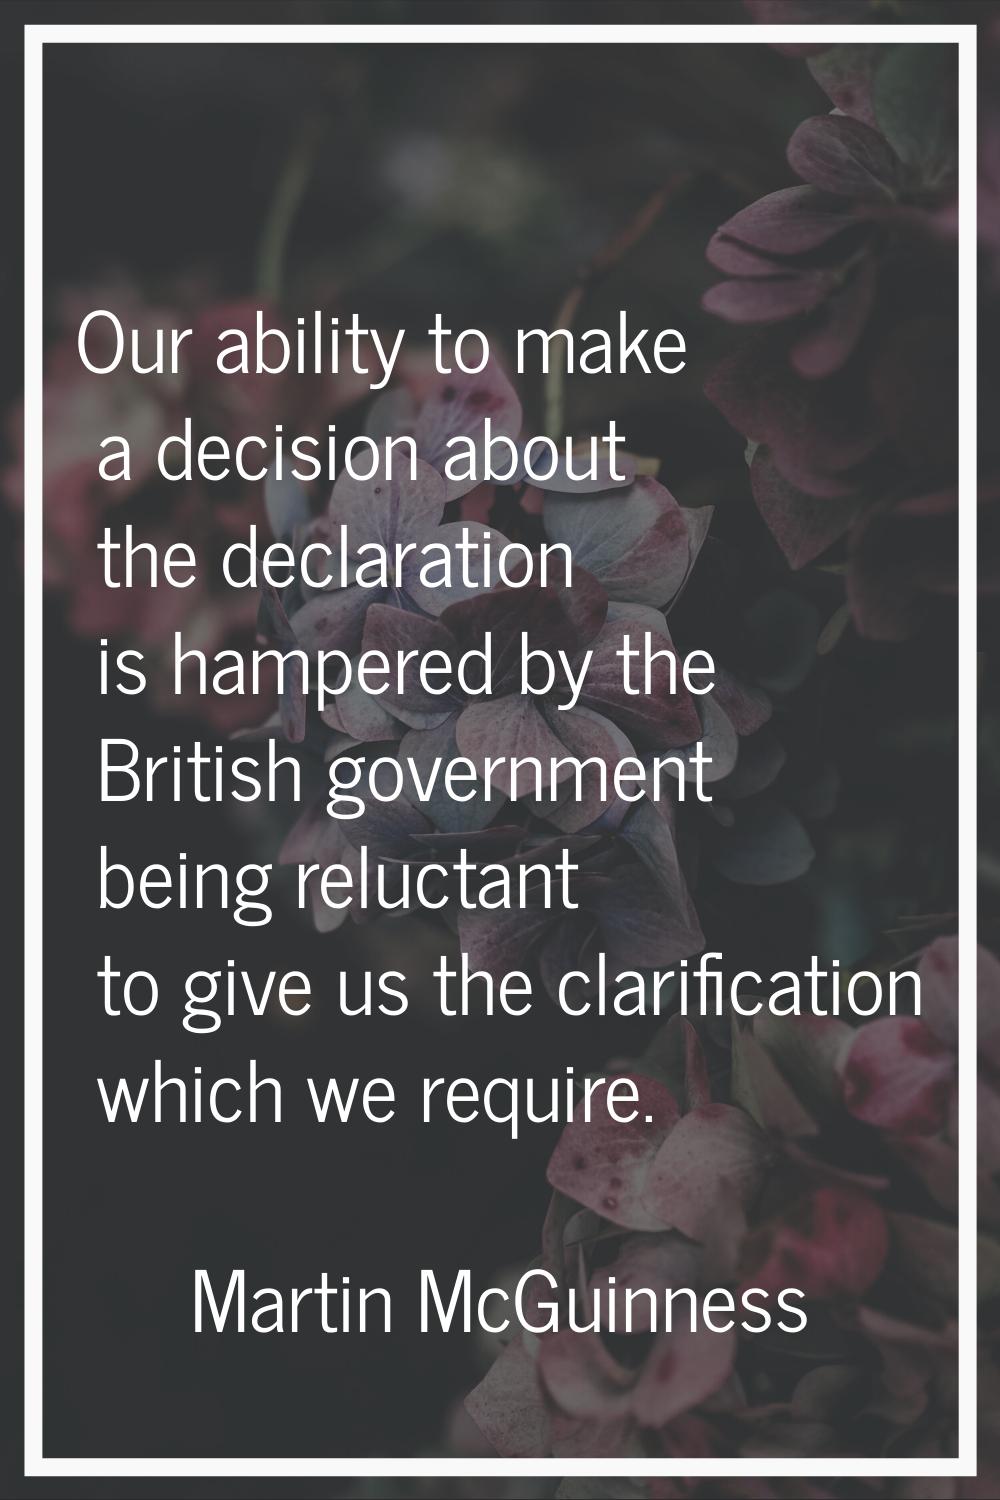 Our ability to make a decision about the declaration is hampered by the British government being re